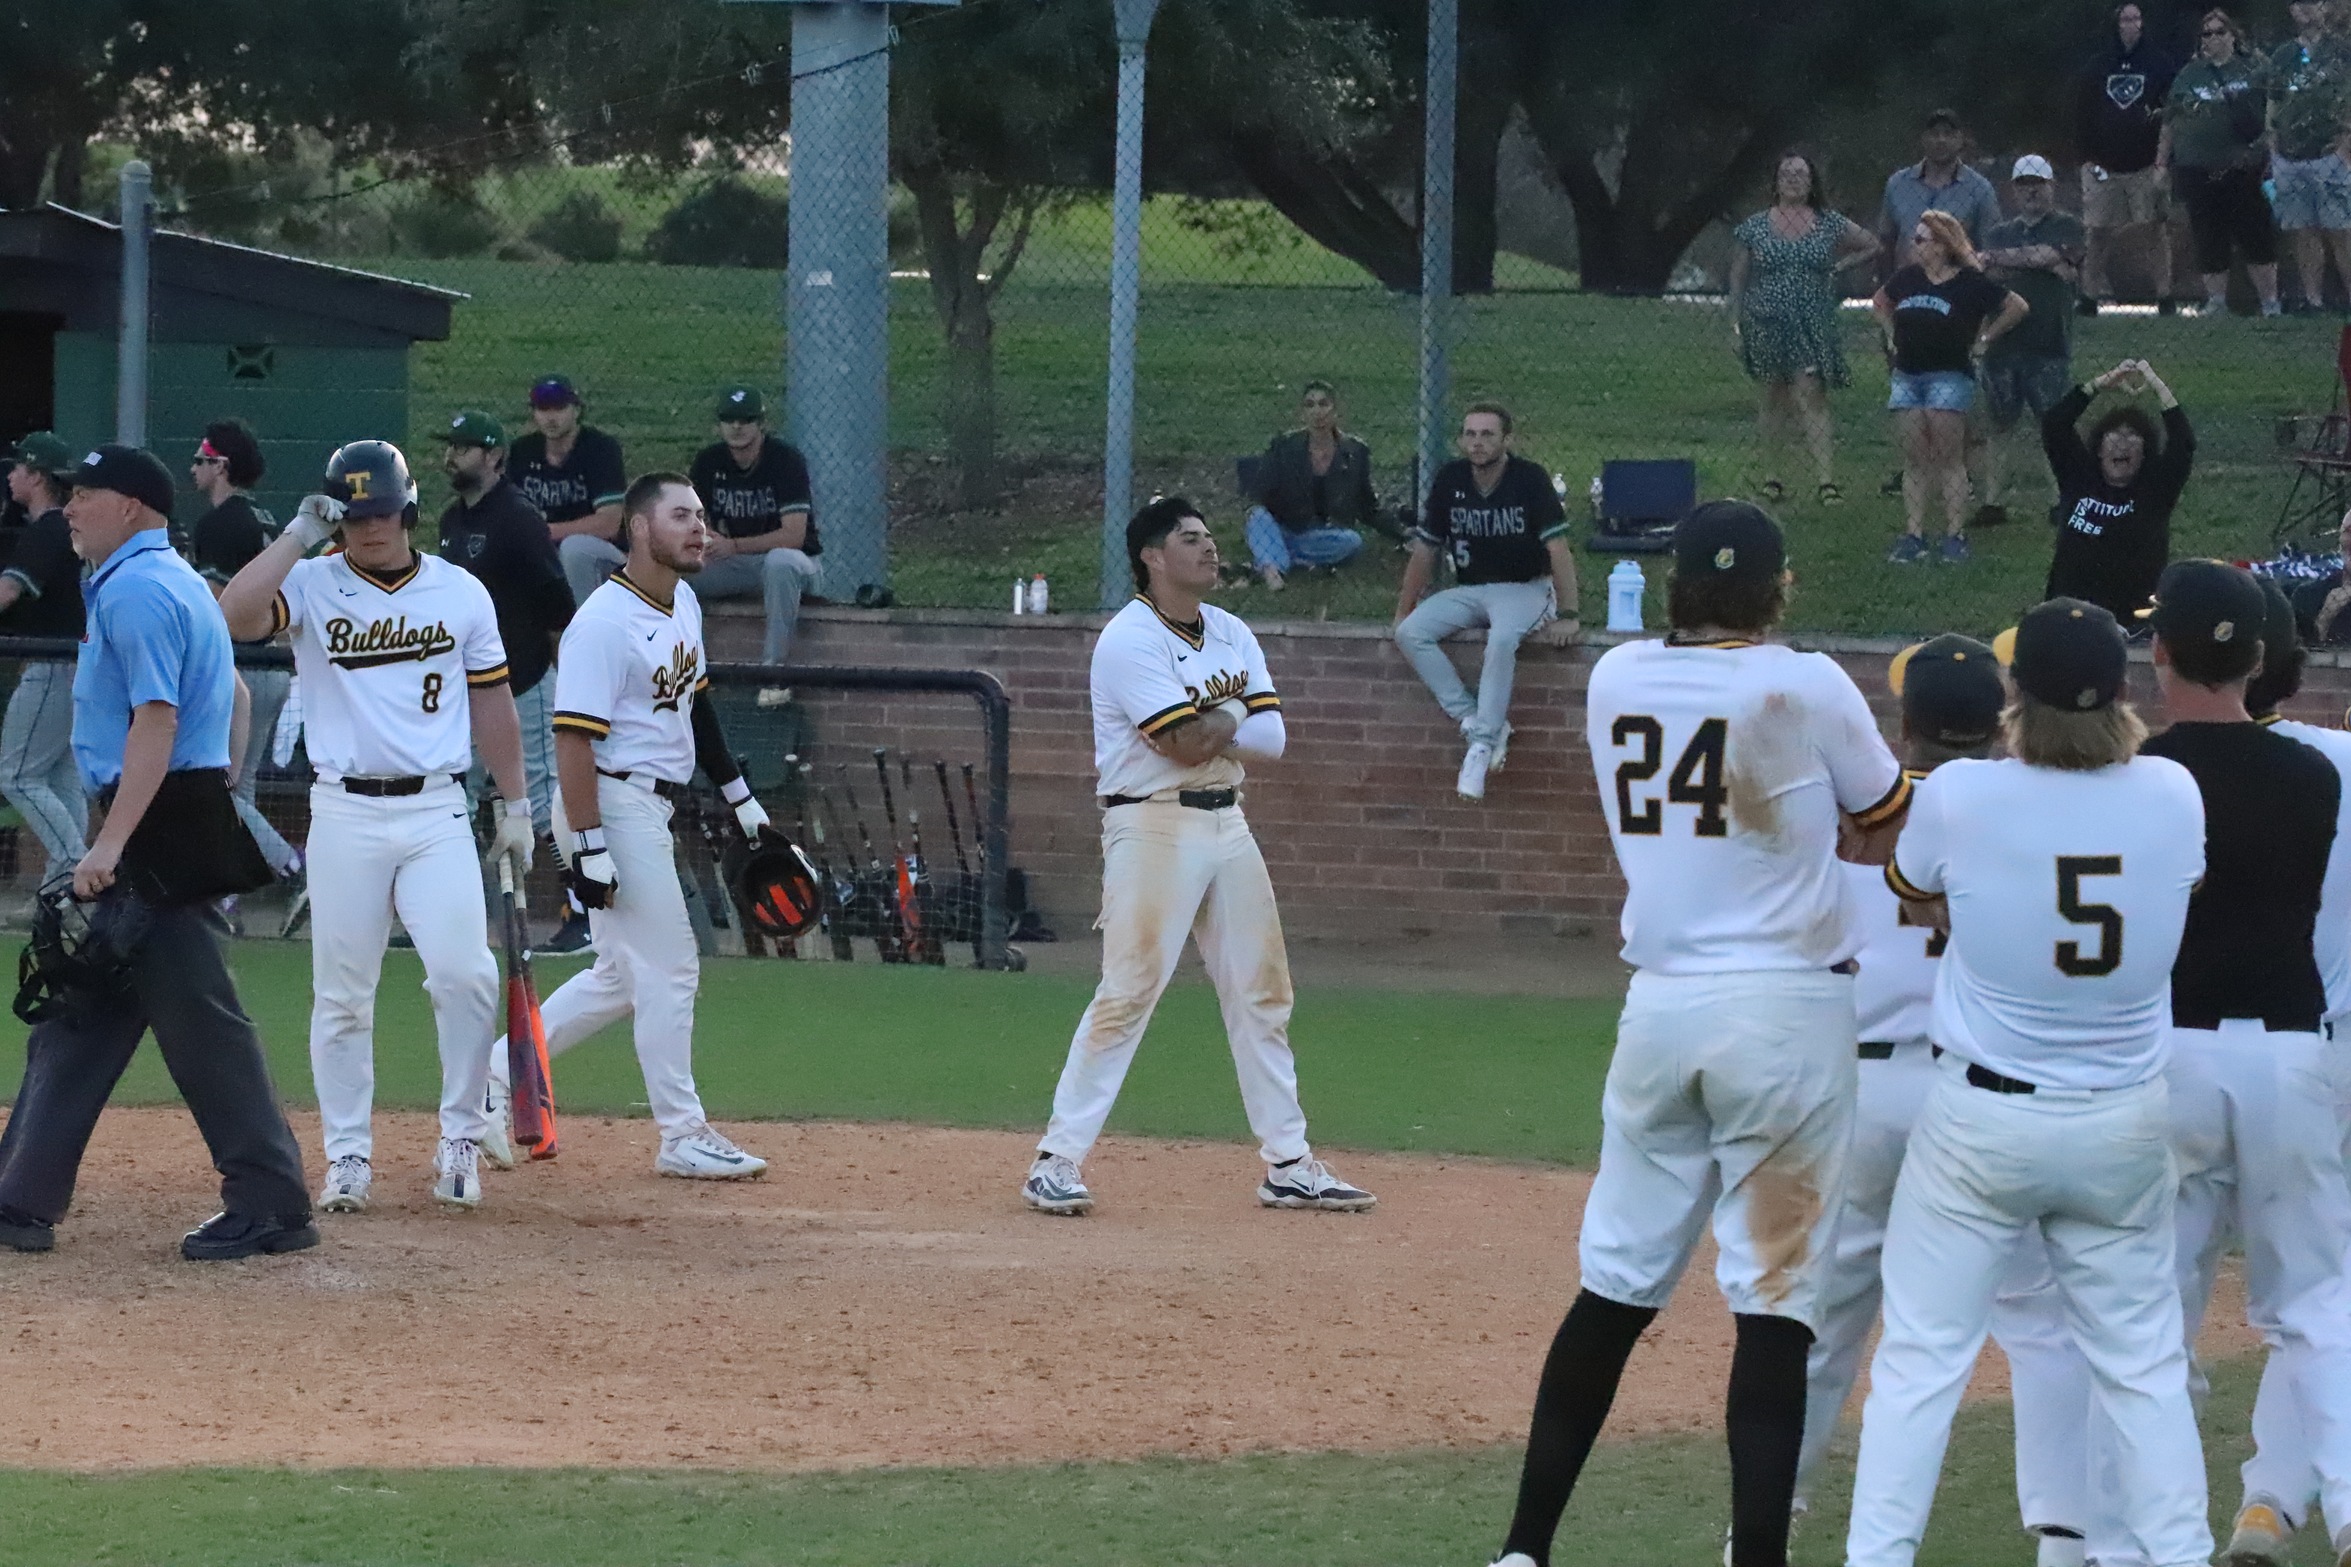 Aric Vasquez celebrates after his home run (photo by Brylie Nedd '25)